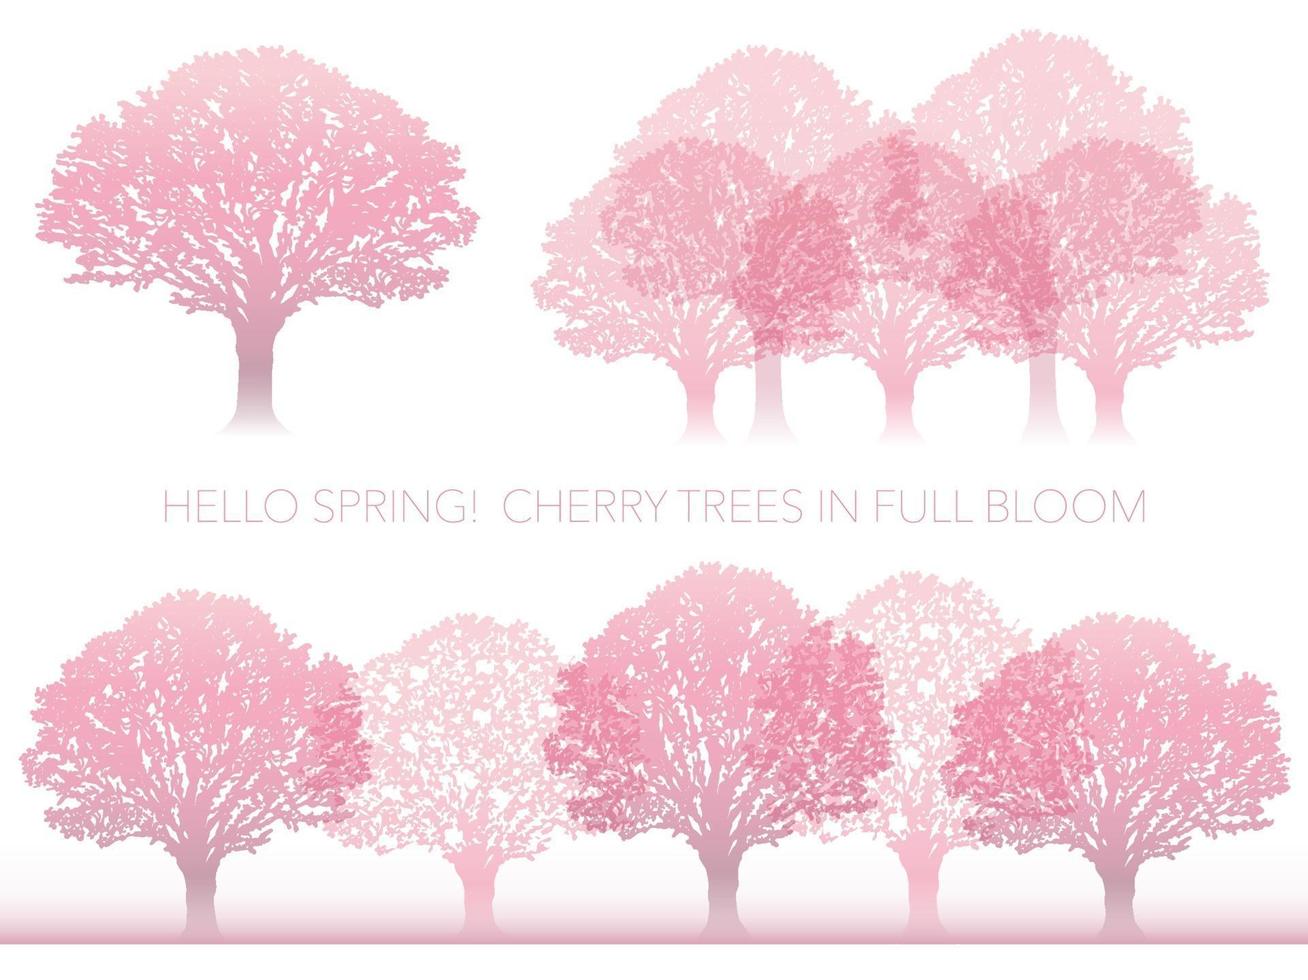 Set Of Vector Cherry Trees In Full Bloom Isolated On A White Background.